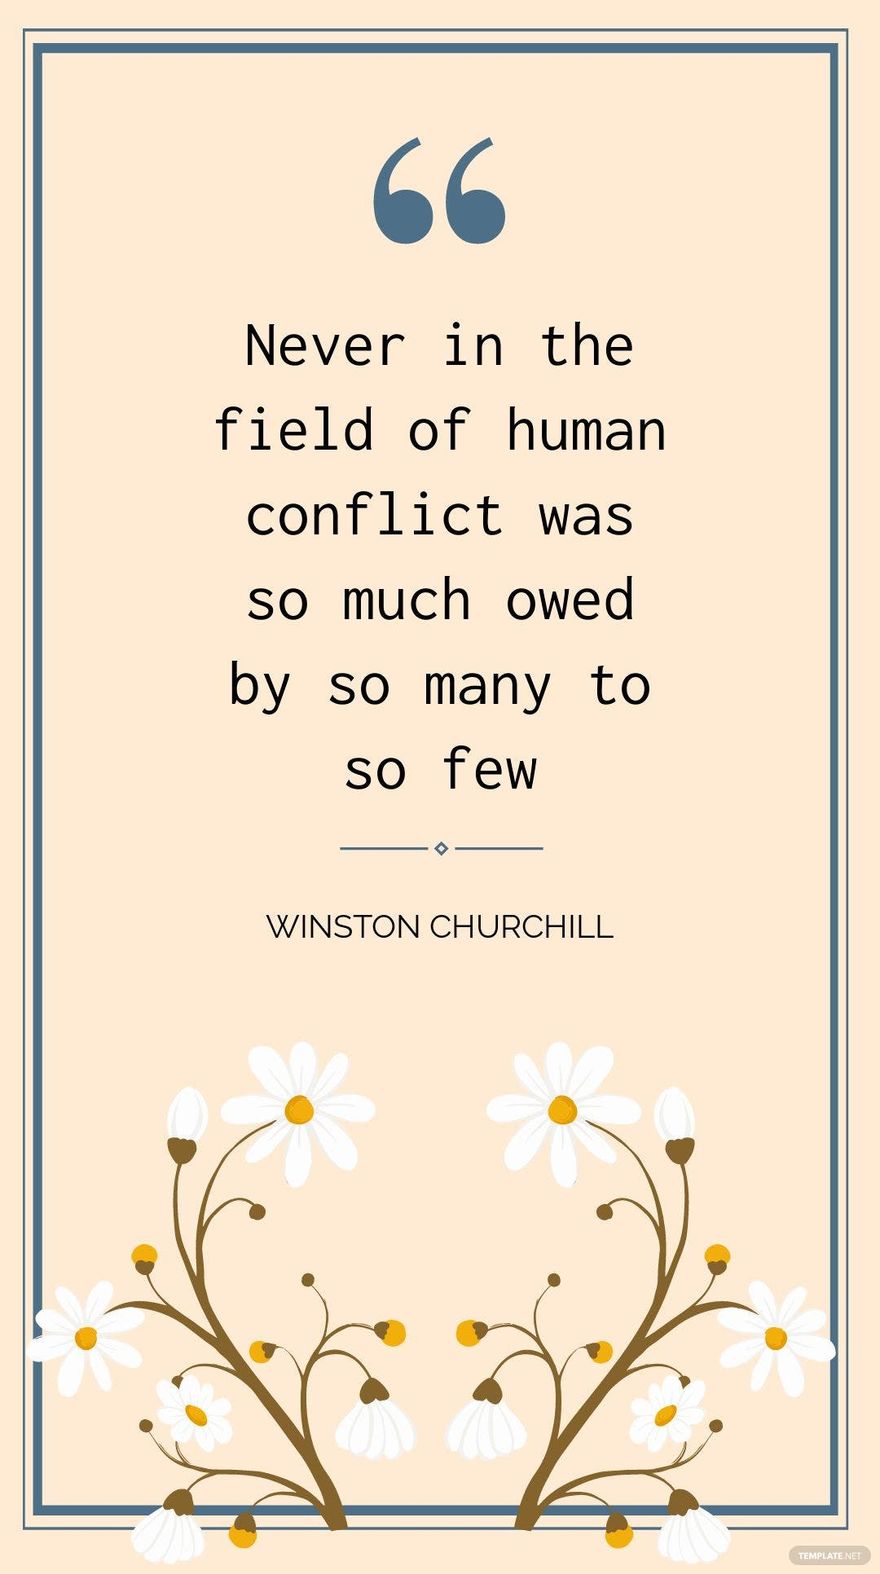 Winston Churchill - Never in the field of human conflict was so much owed by so many to so few 